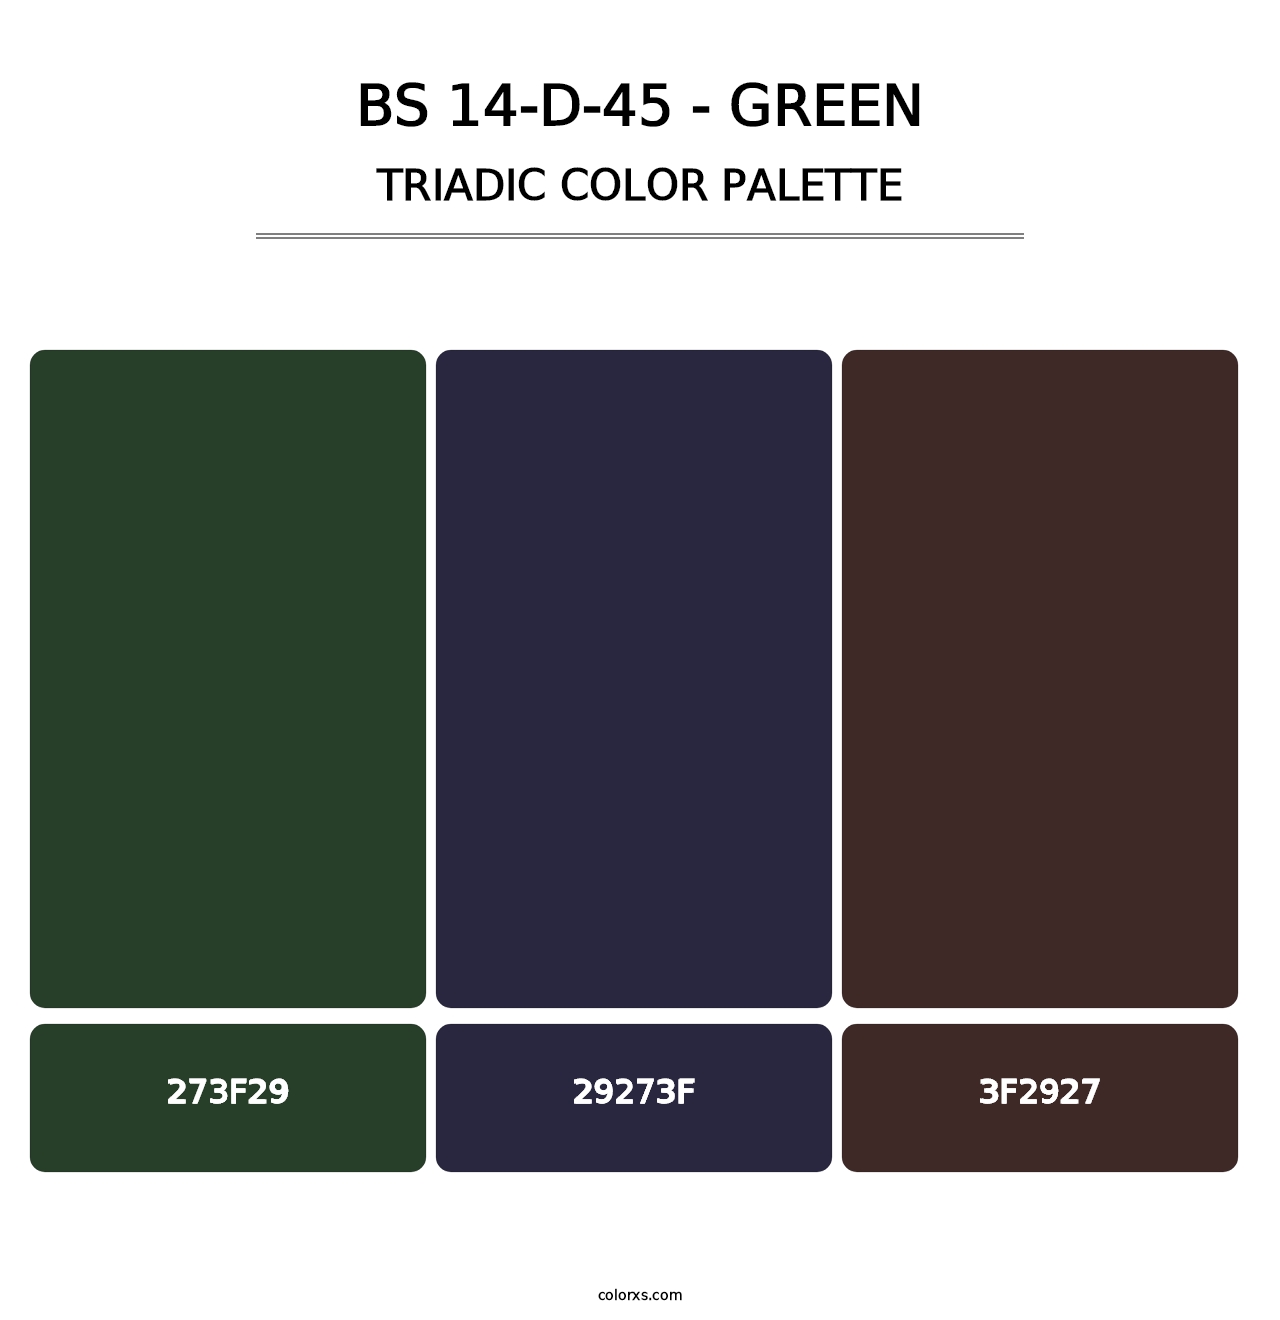 BS 14-D-45 - Green - Triadic Color Palette